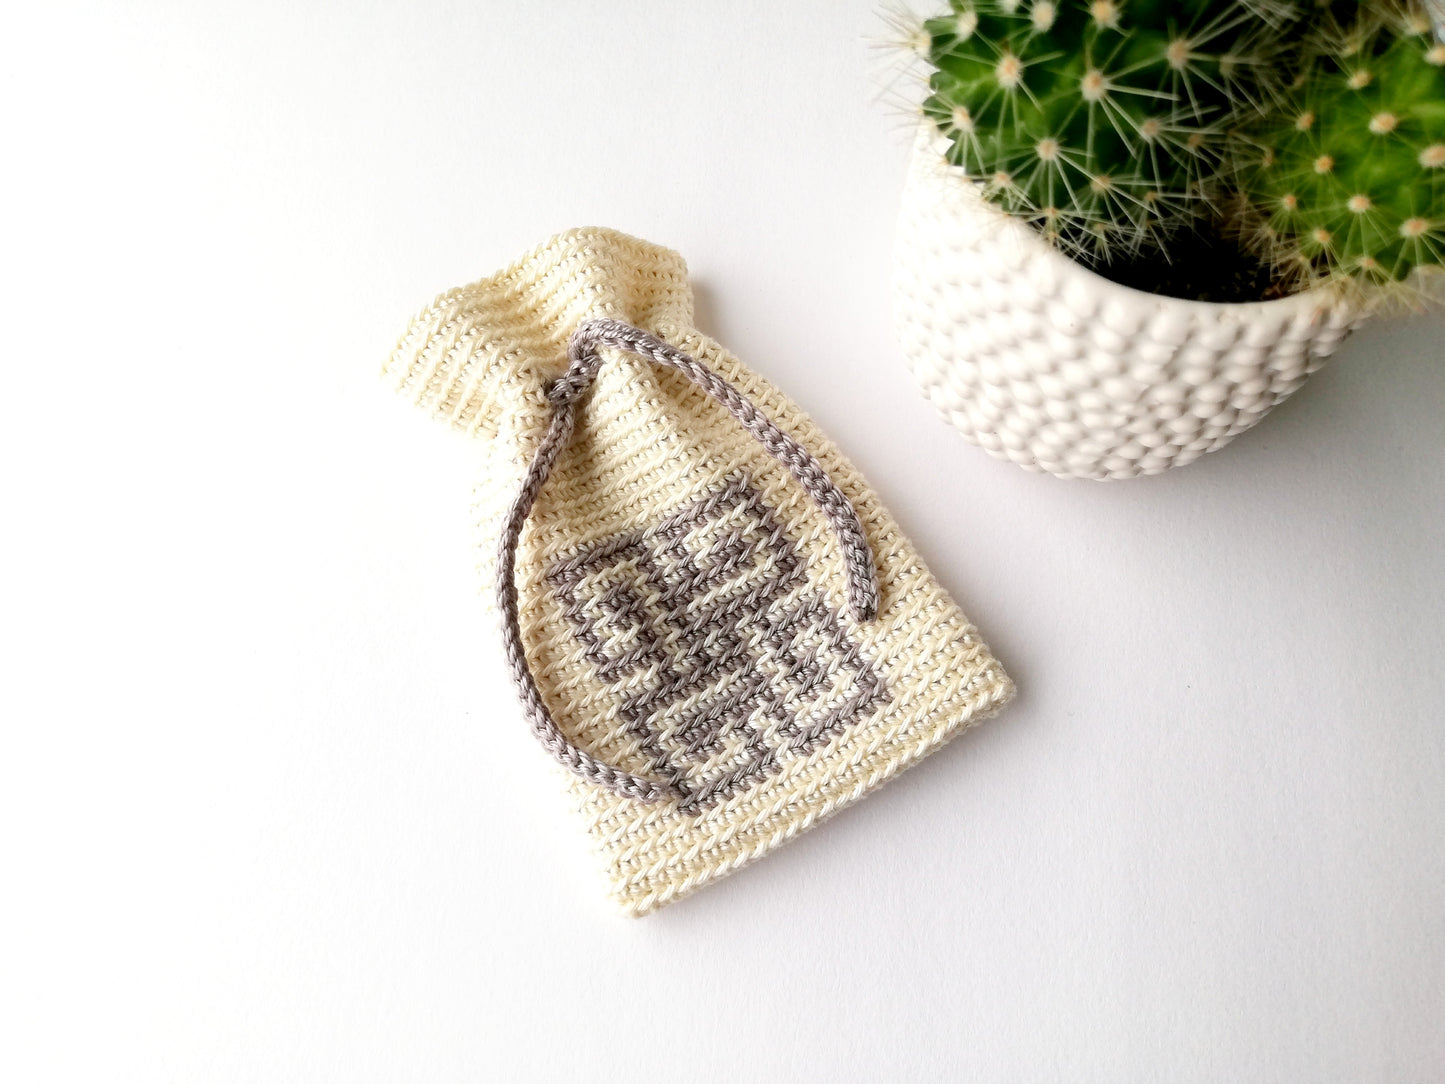 Drawstring crochet bag with a Celtic knot